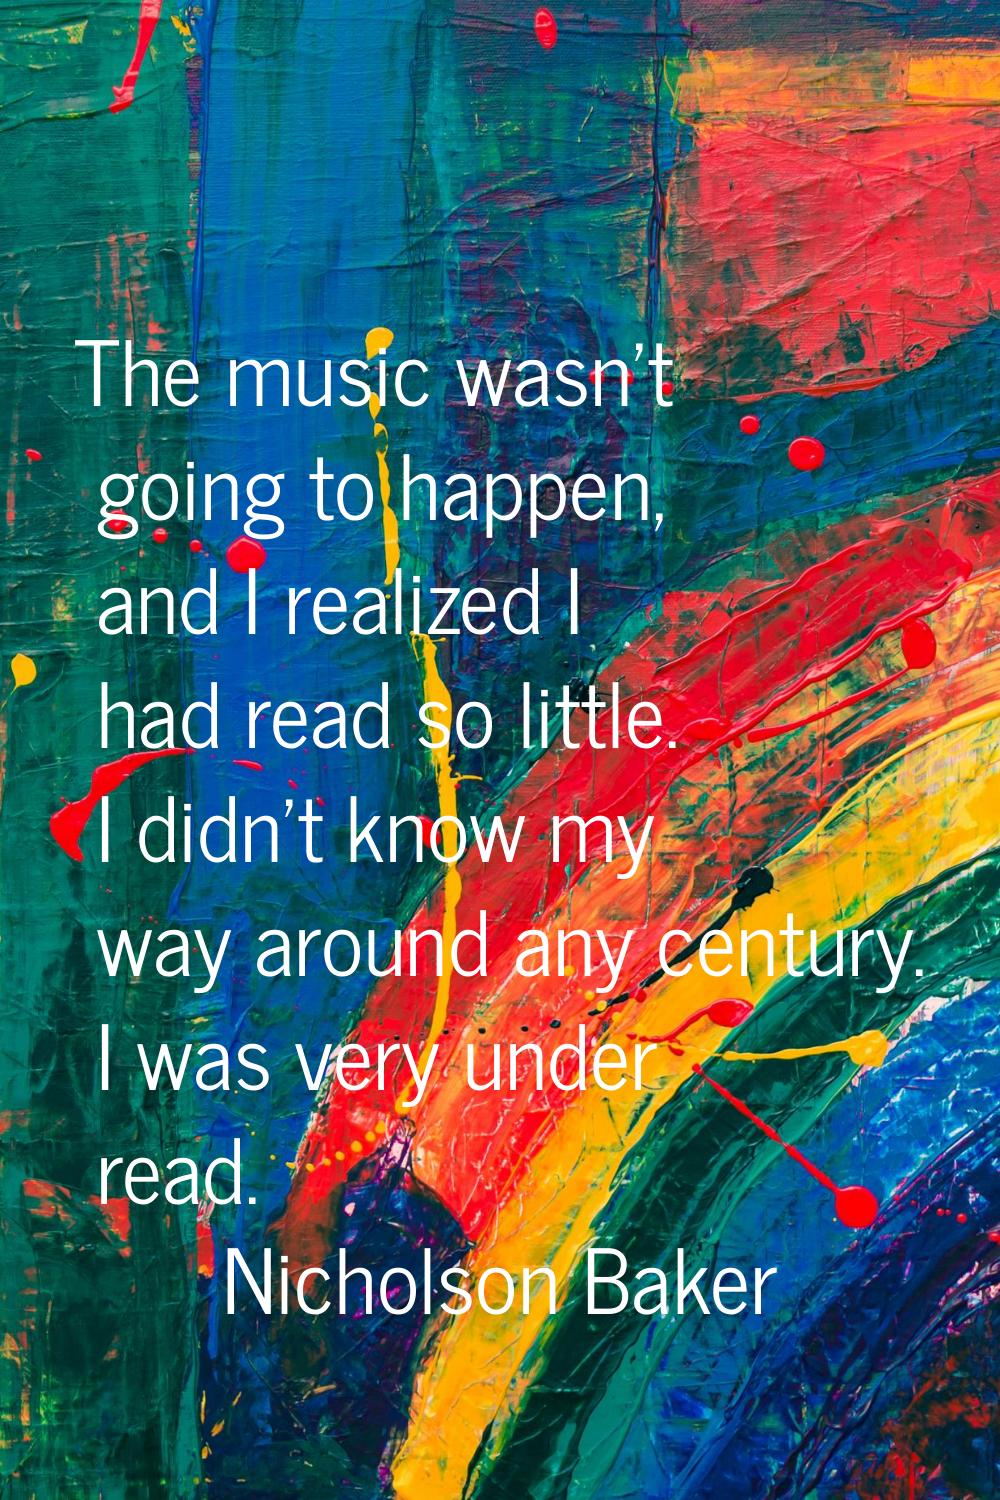 The music wasn't going to happen, and I realized I had read so little. I didn't know my way around 